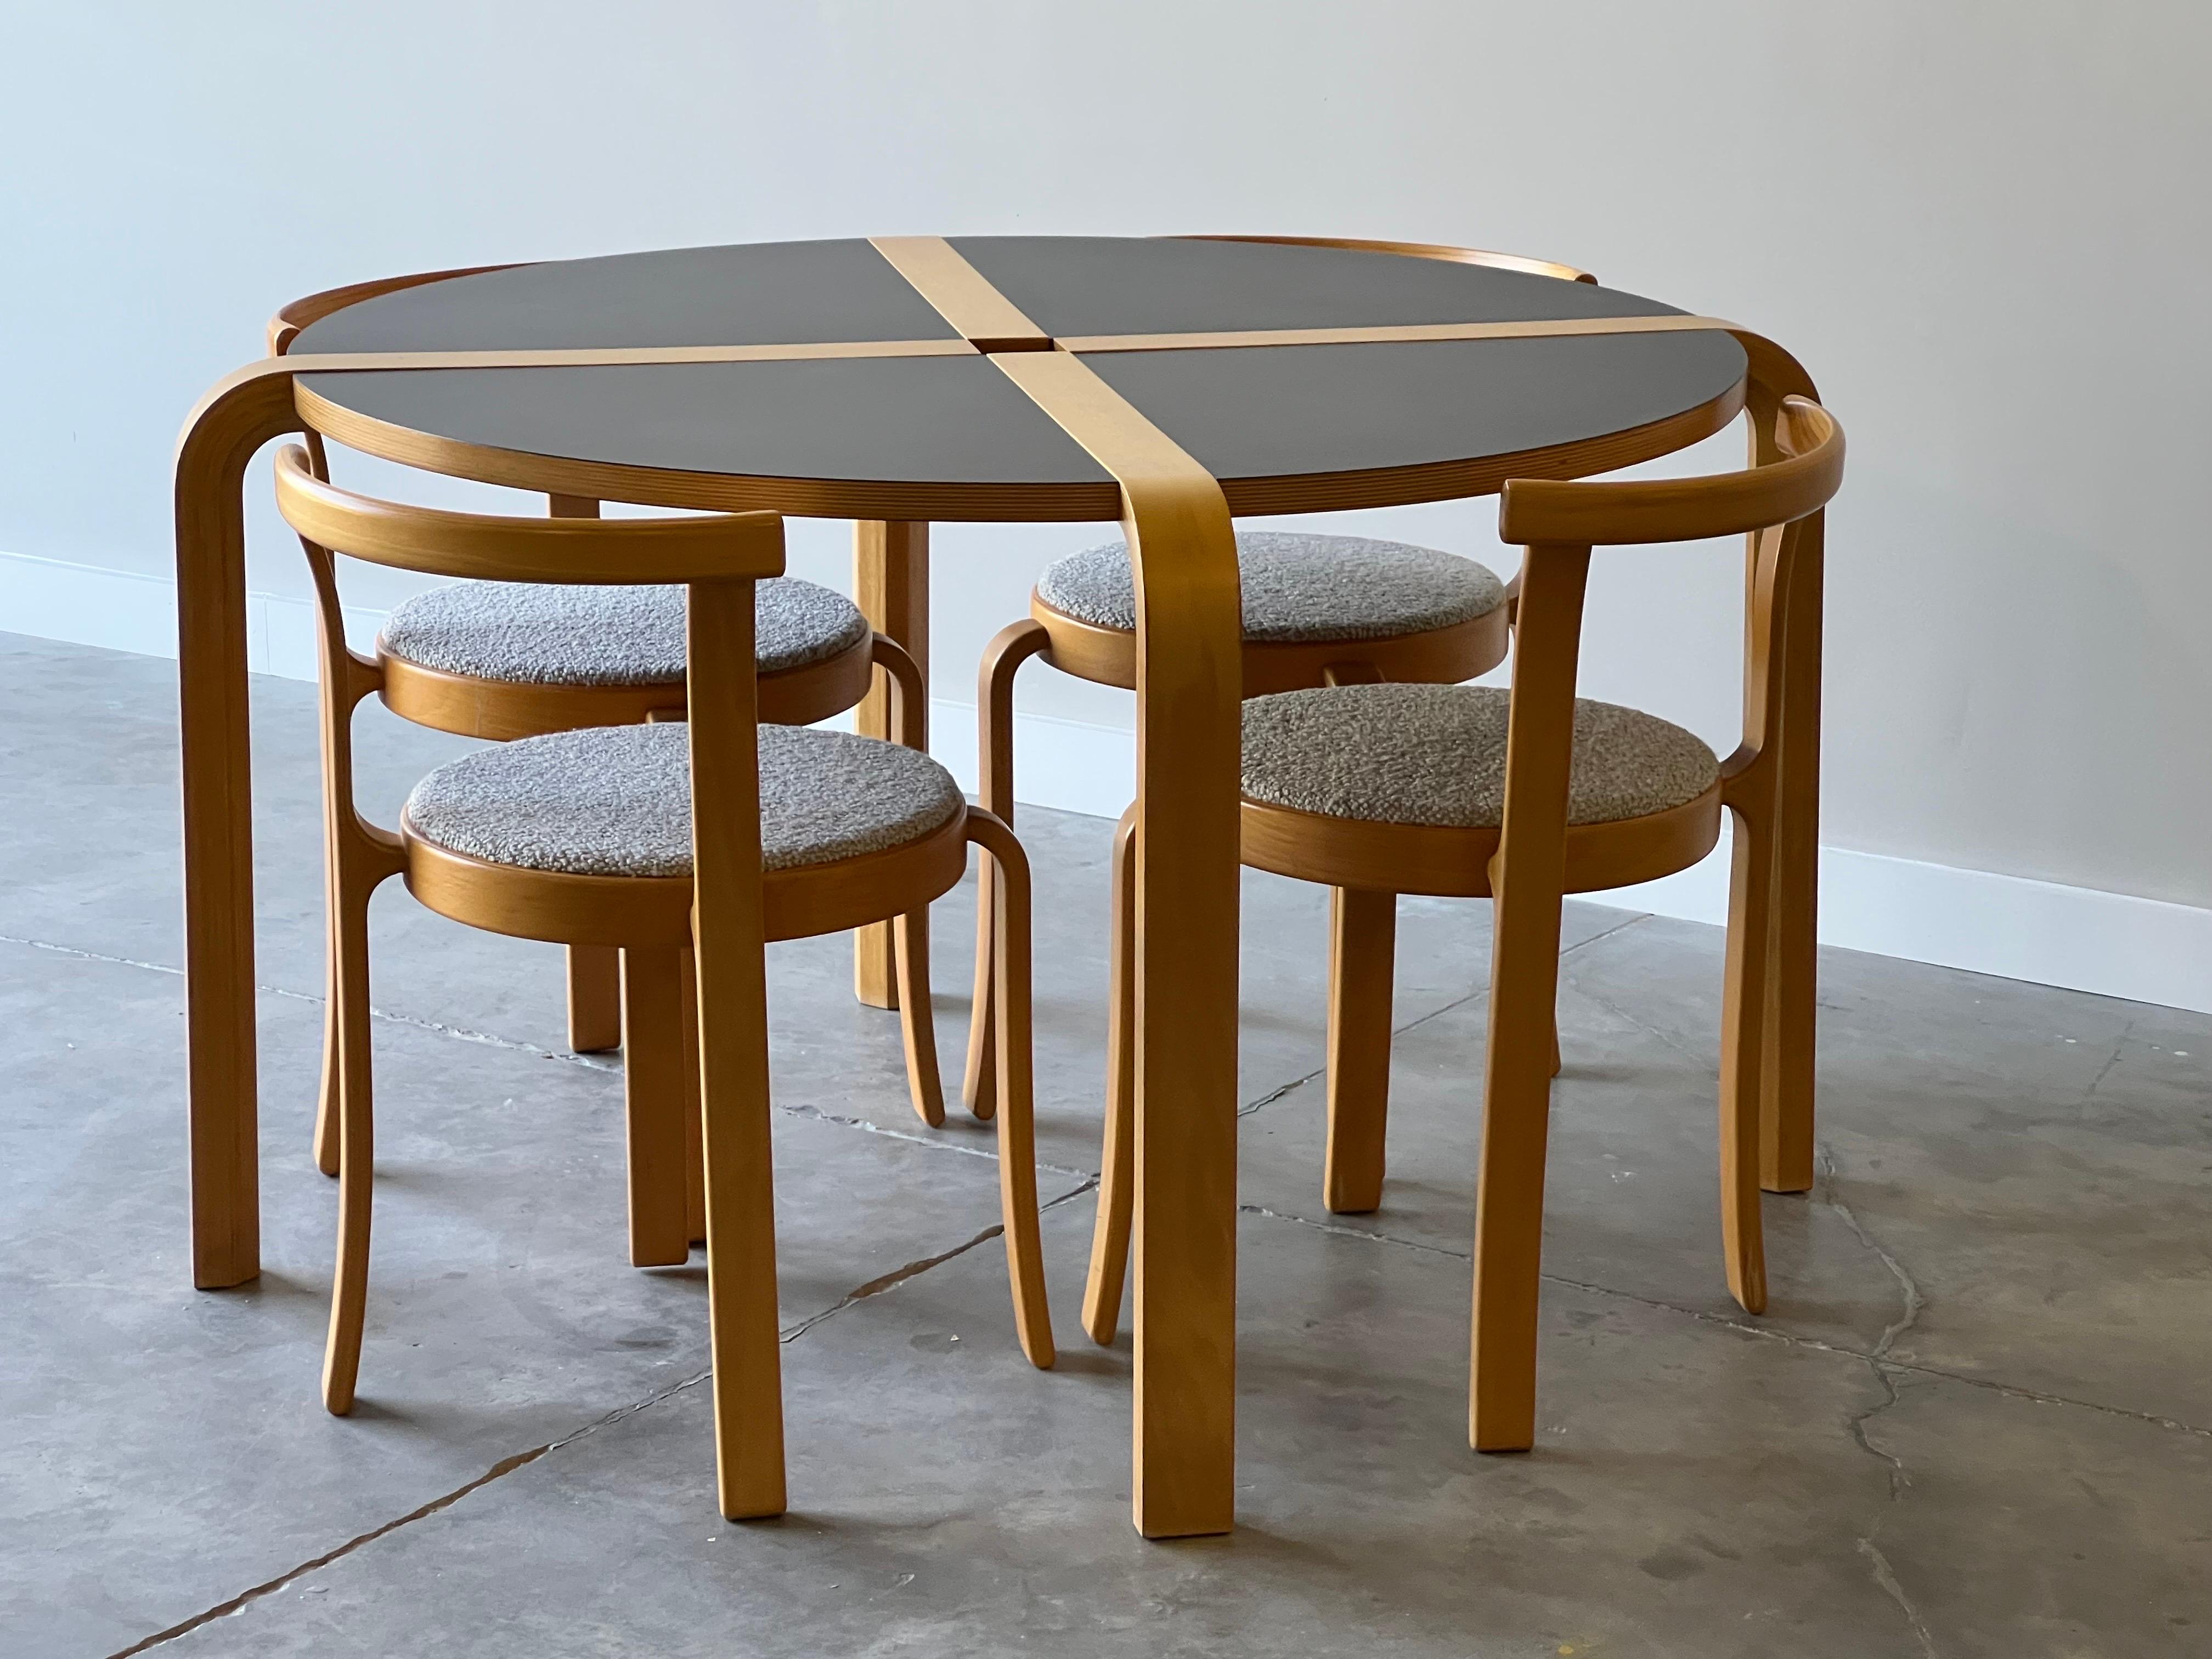 Magnificent and ultra sleek Danish Series 8000 dining set designed by Rud Thygesen and Johnny Sorensen for Magnus Olesen circa 1980s.

This design is sooooooo amazing with perfect bent beech wood and clean lines. Each chair stacks and has been newly